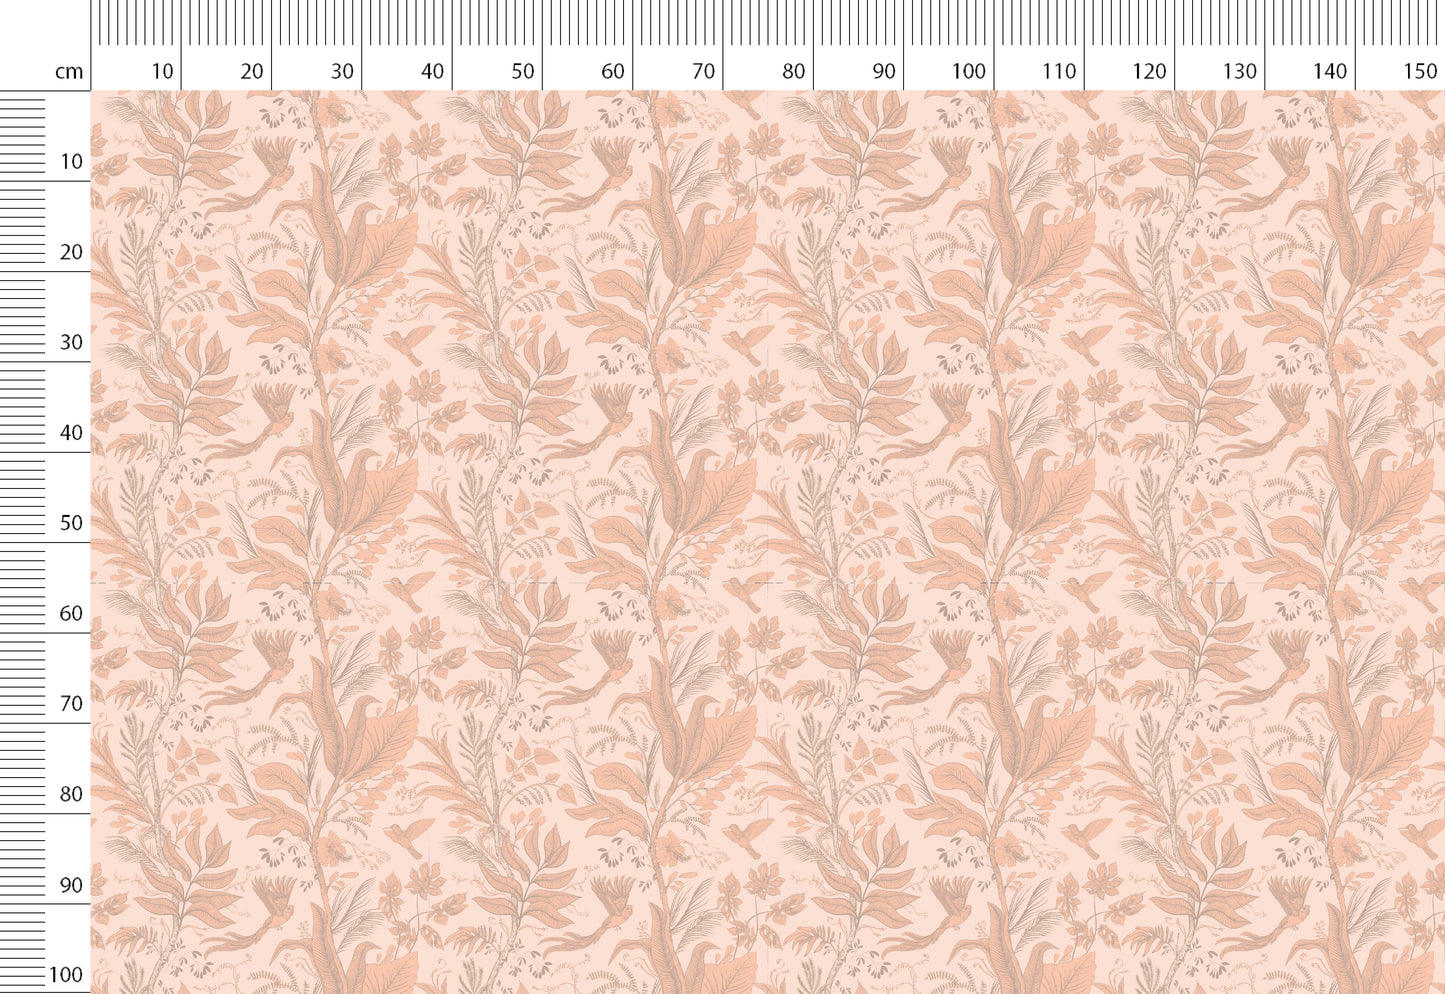 Vintage Linen Fabric by the yard or meter. Vintage Tropical Peach Pink Color Print Linen For Bedding, Curtains, and Clothing..